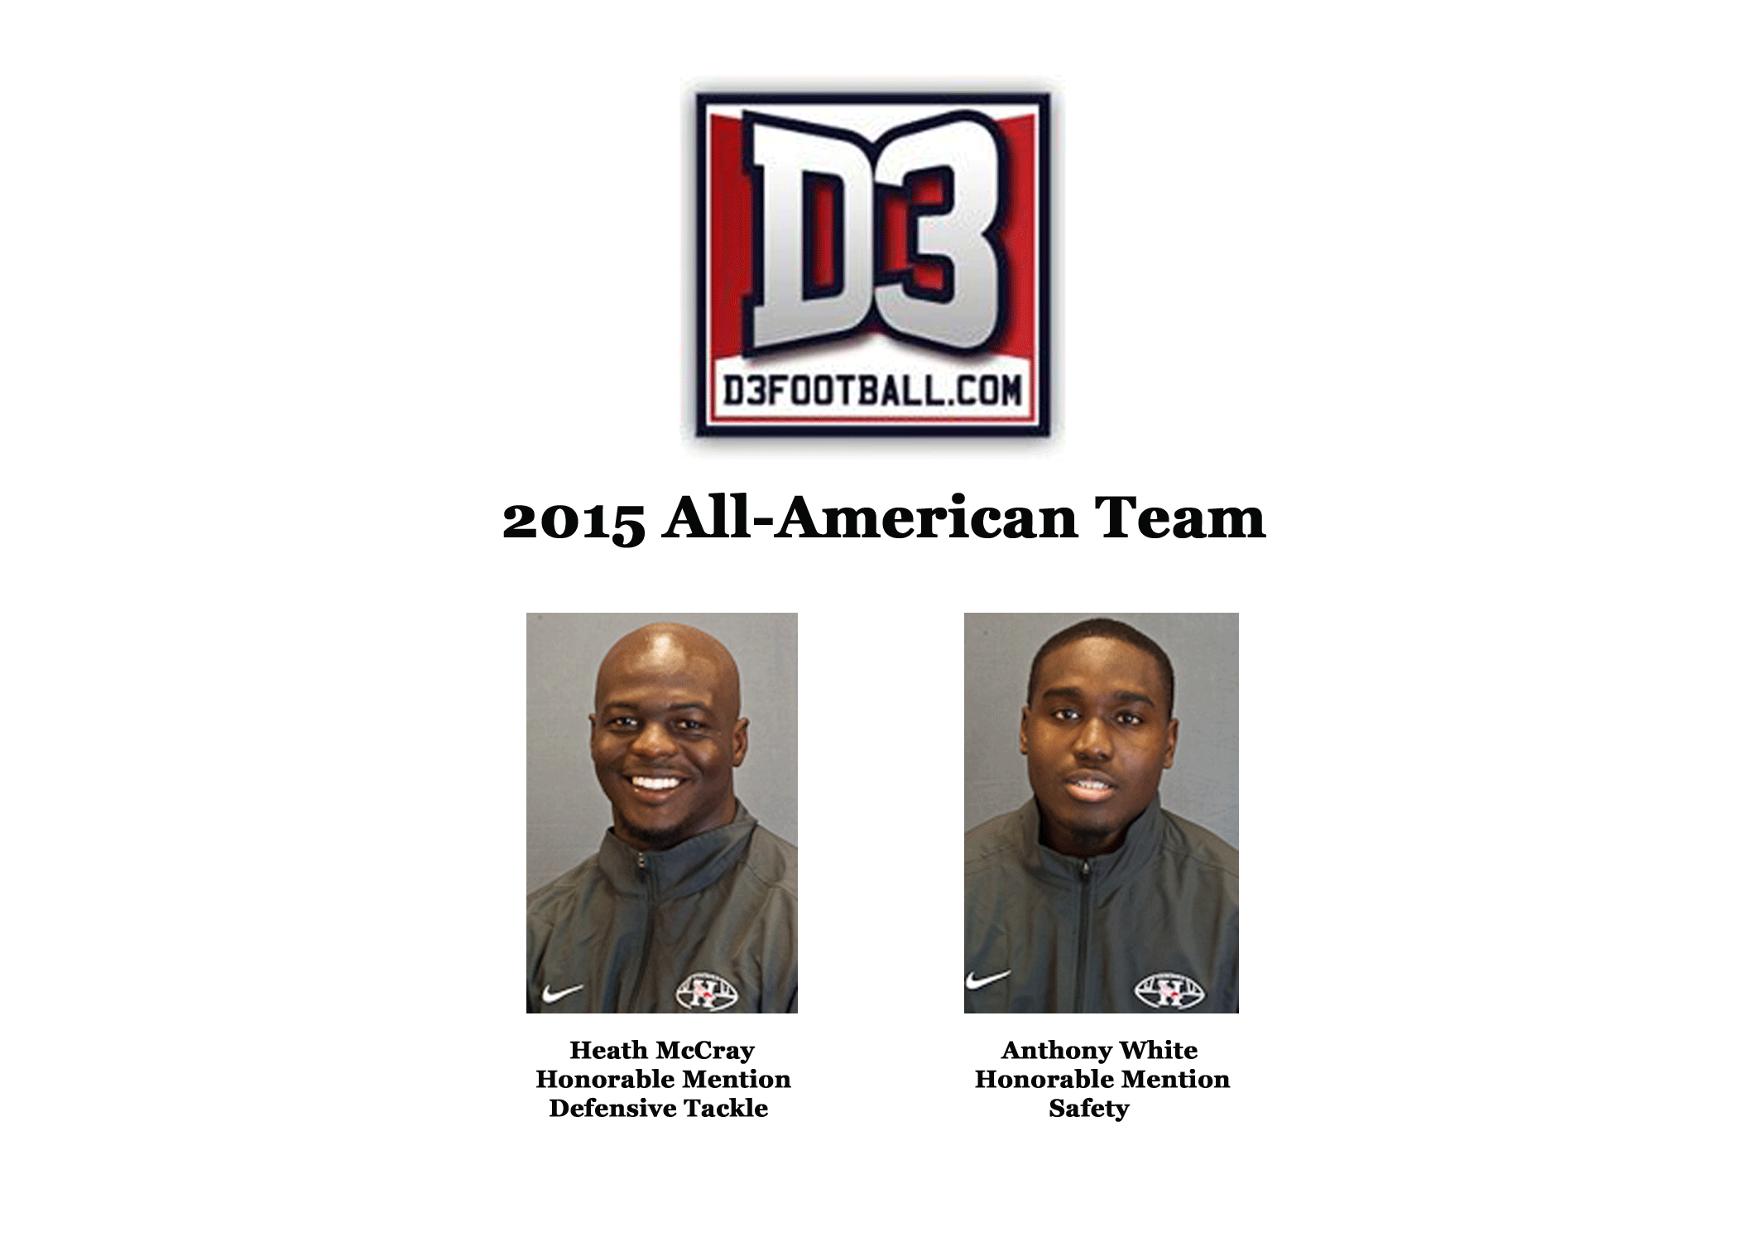 McCray and White recognized on D3football.com All-American teams